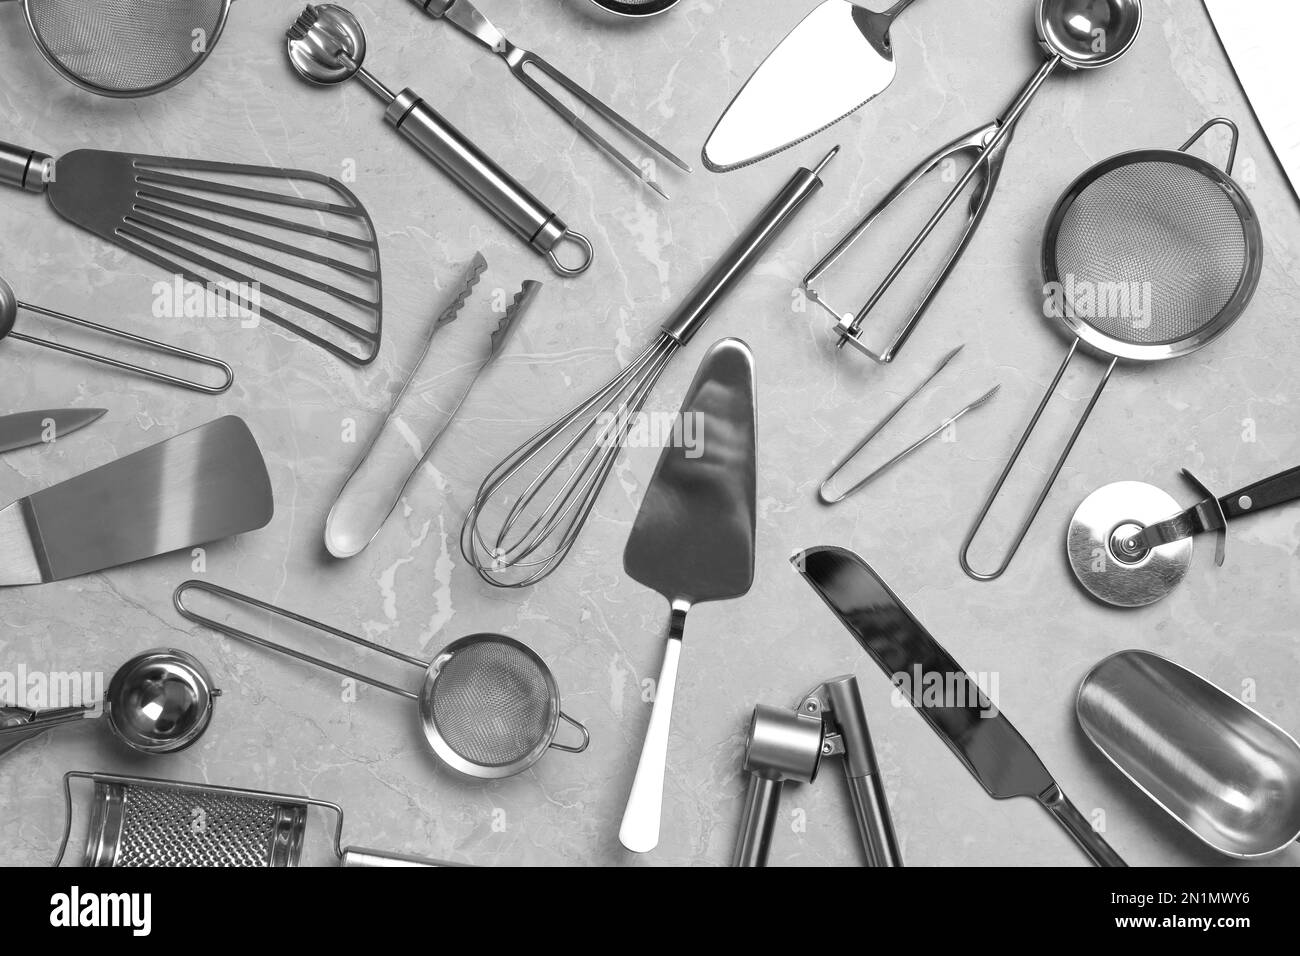 Cooking utensils on grey marble table, flat lay Stock Photo